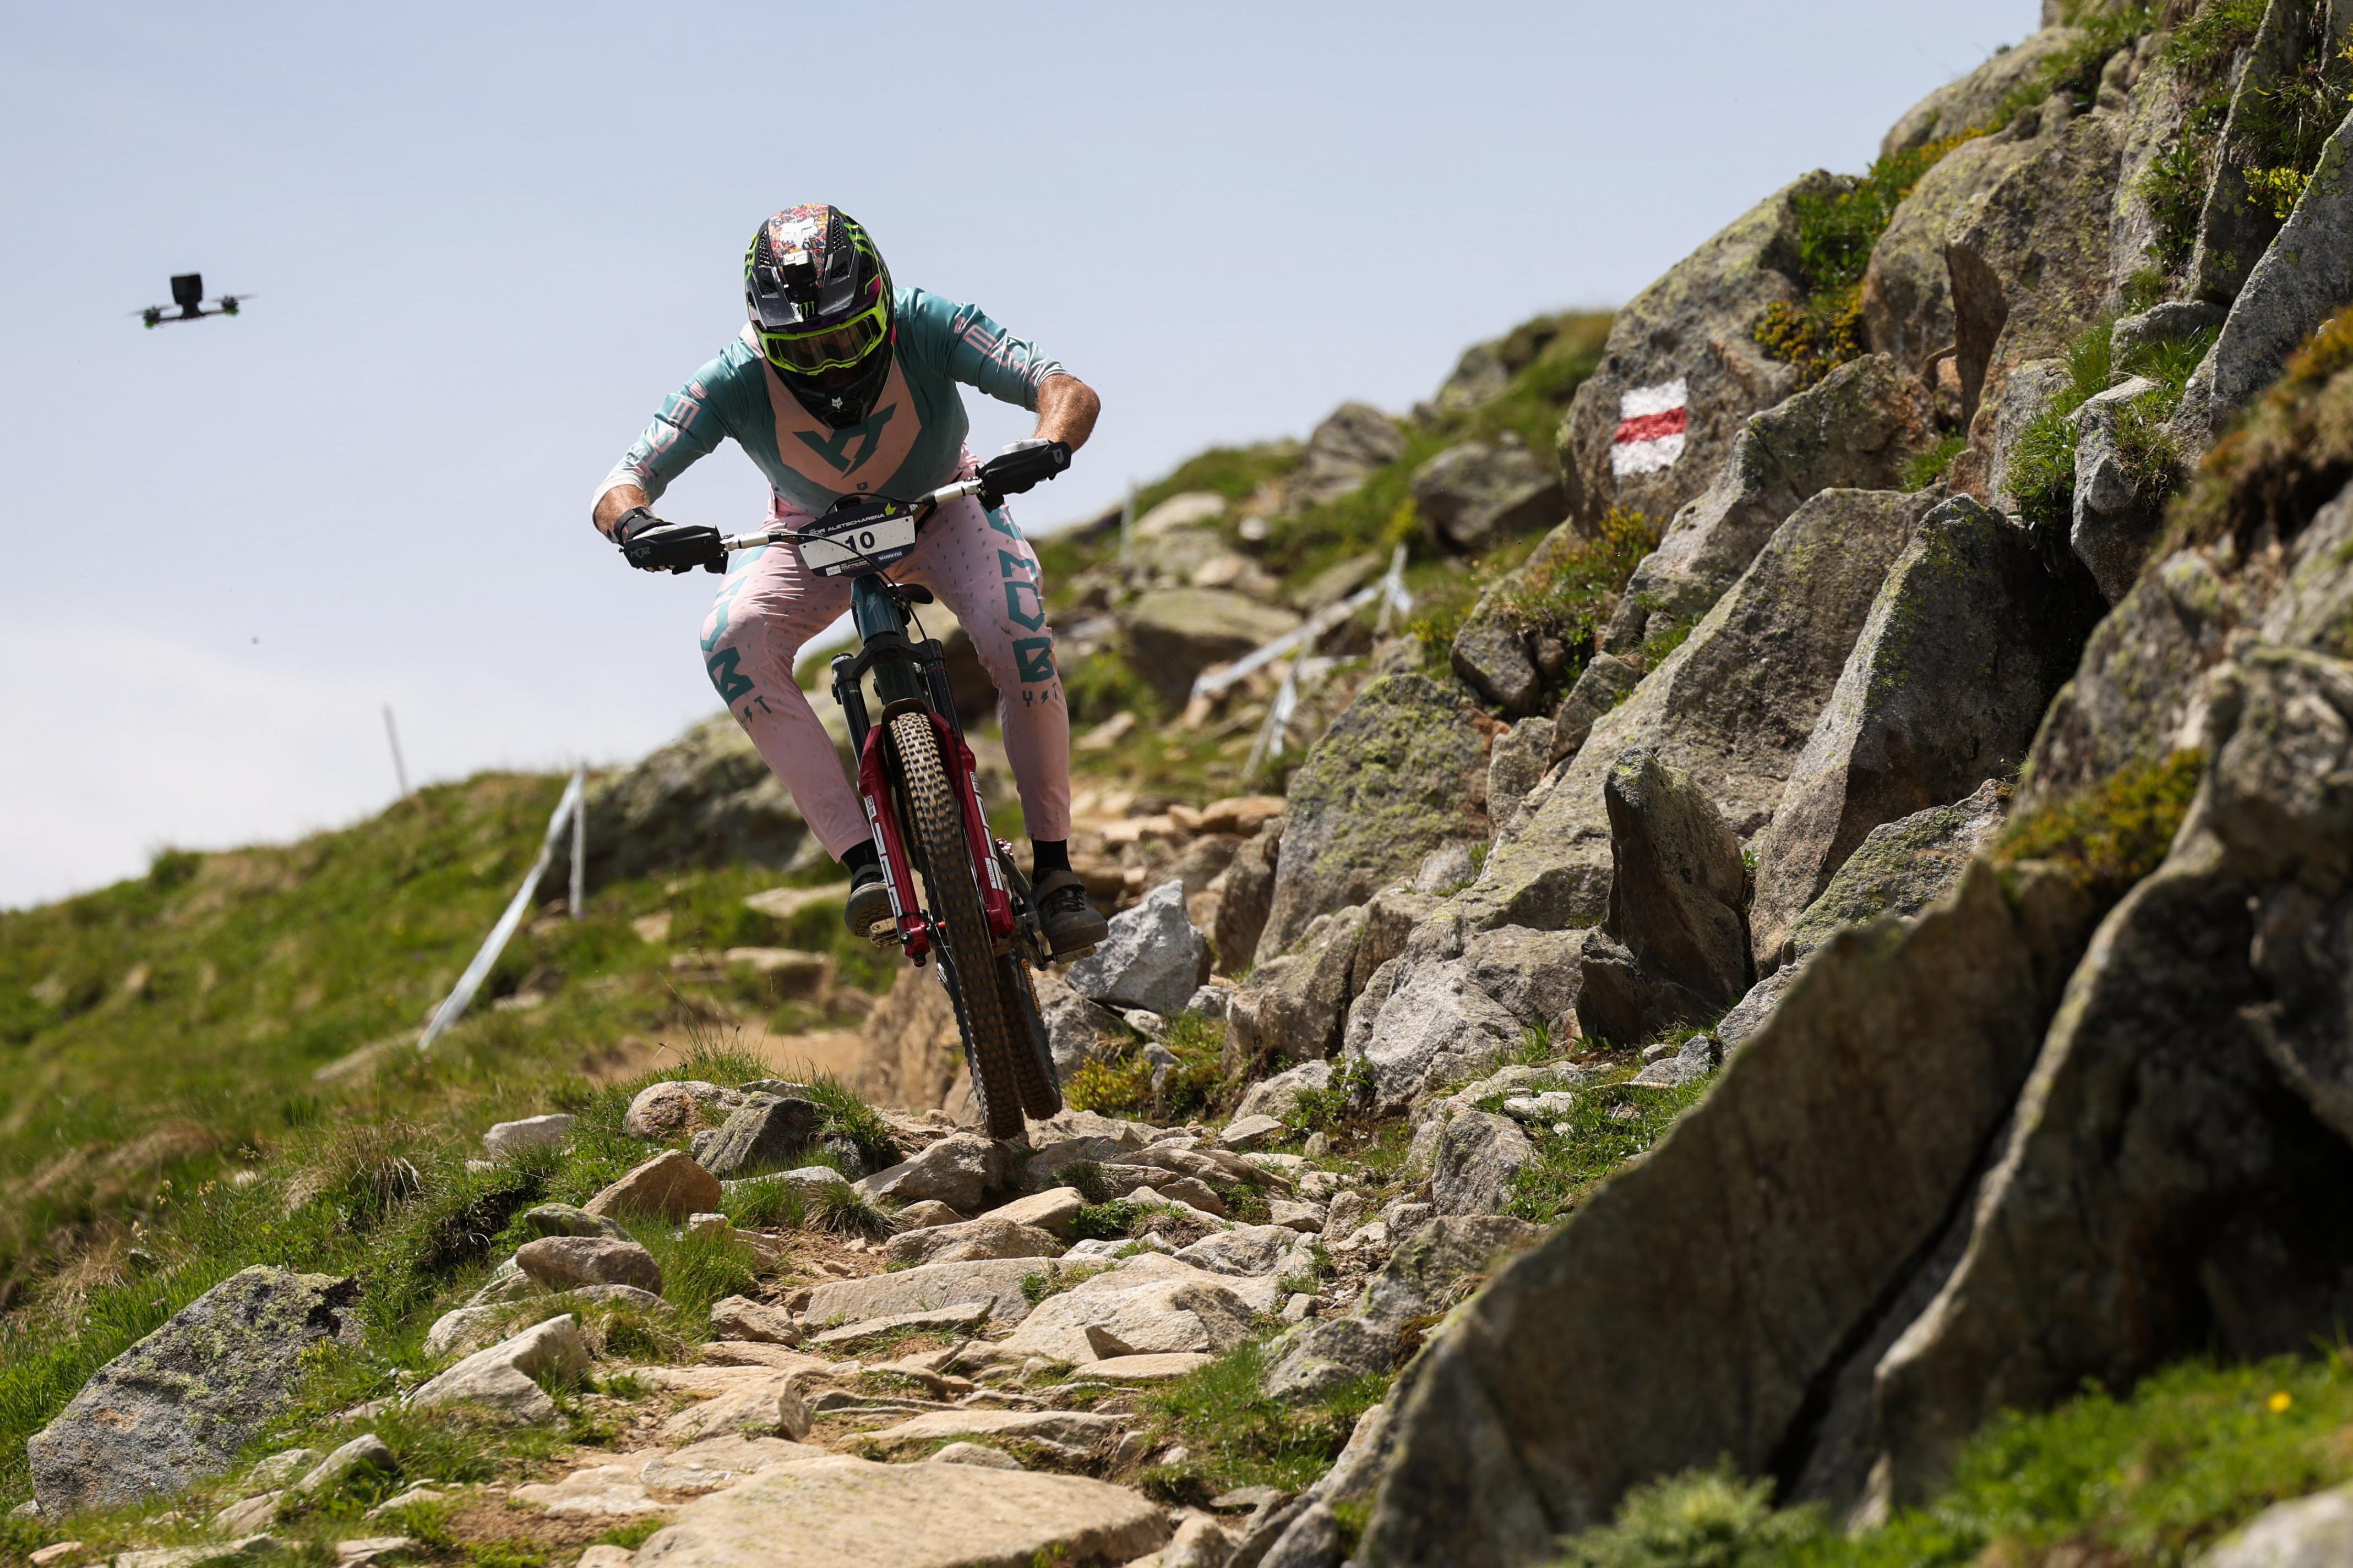 ESPIÑEIRA HERREROS CLOSES IN ON E-ENDURO OVERALL VICTORY AS COURDURIER FACES LATE CHALLENGE TO TITLE DEFENCE IN VALAIS